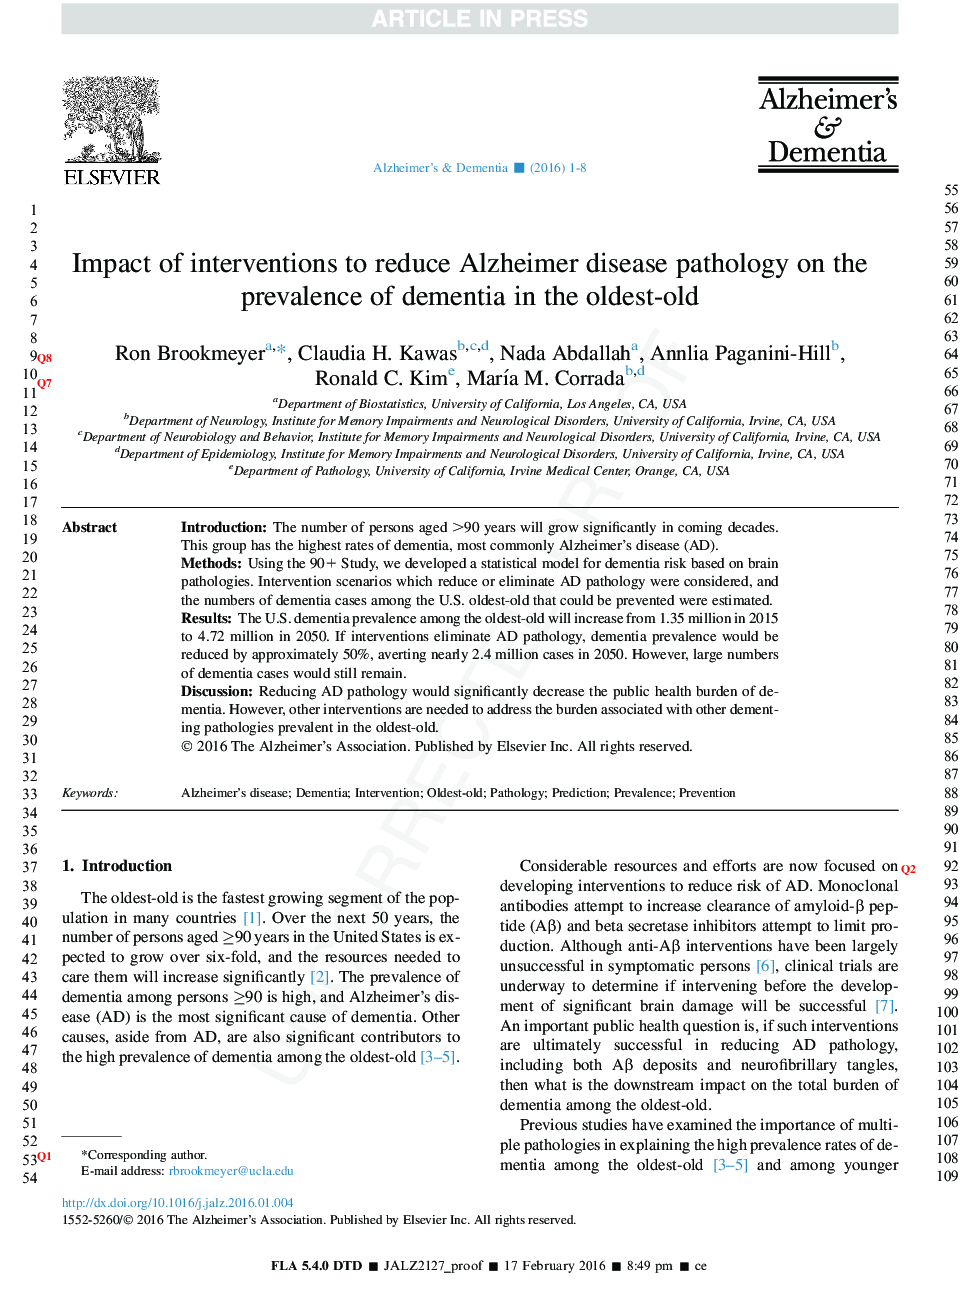 Impact of interventions to reduce Alzheimer's disease pathology on the prevalence of dementia in the oldest-old